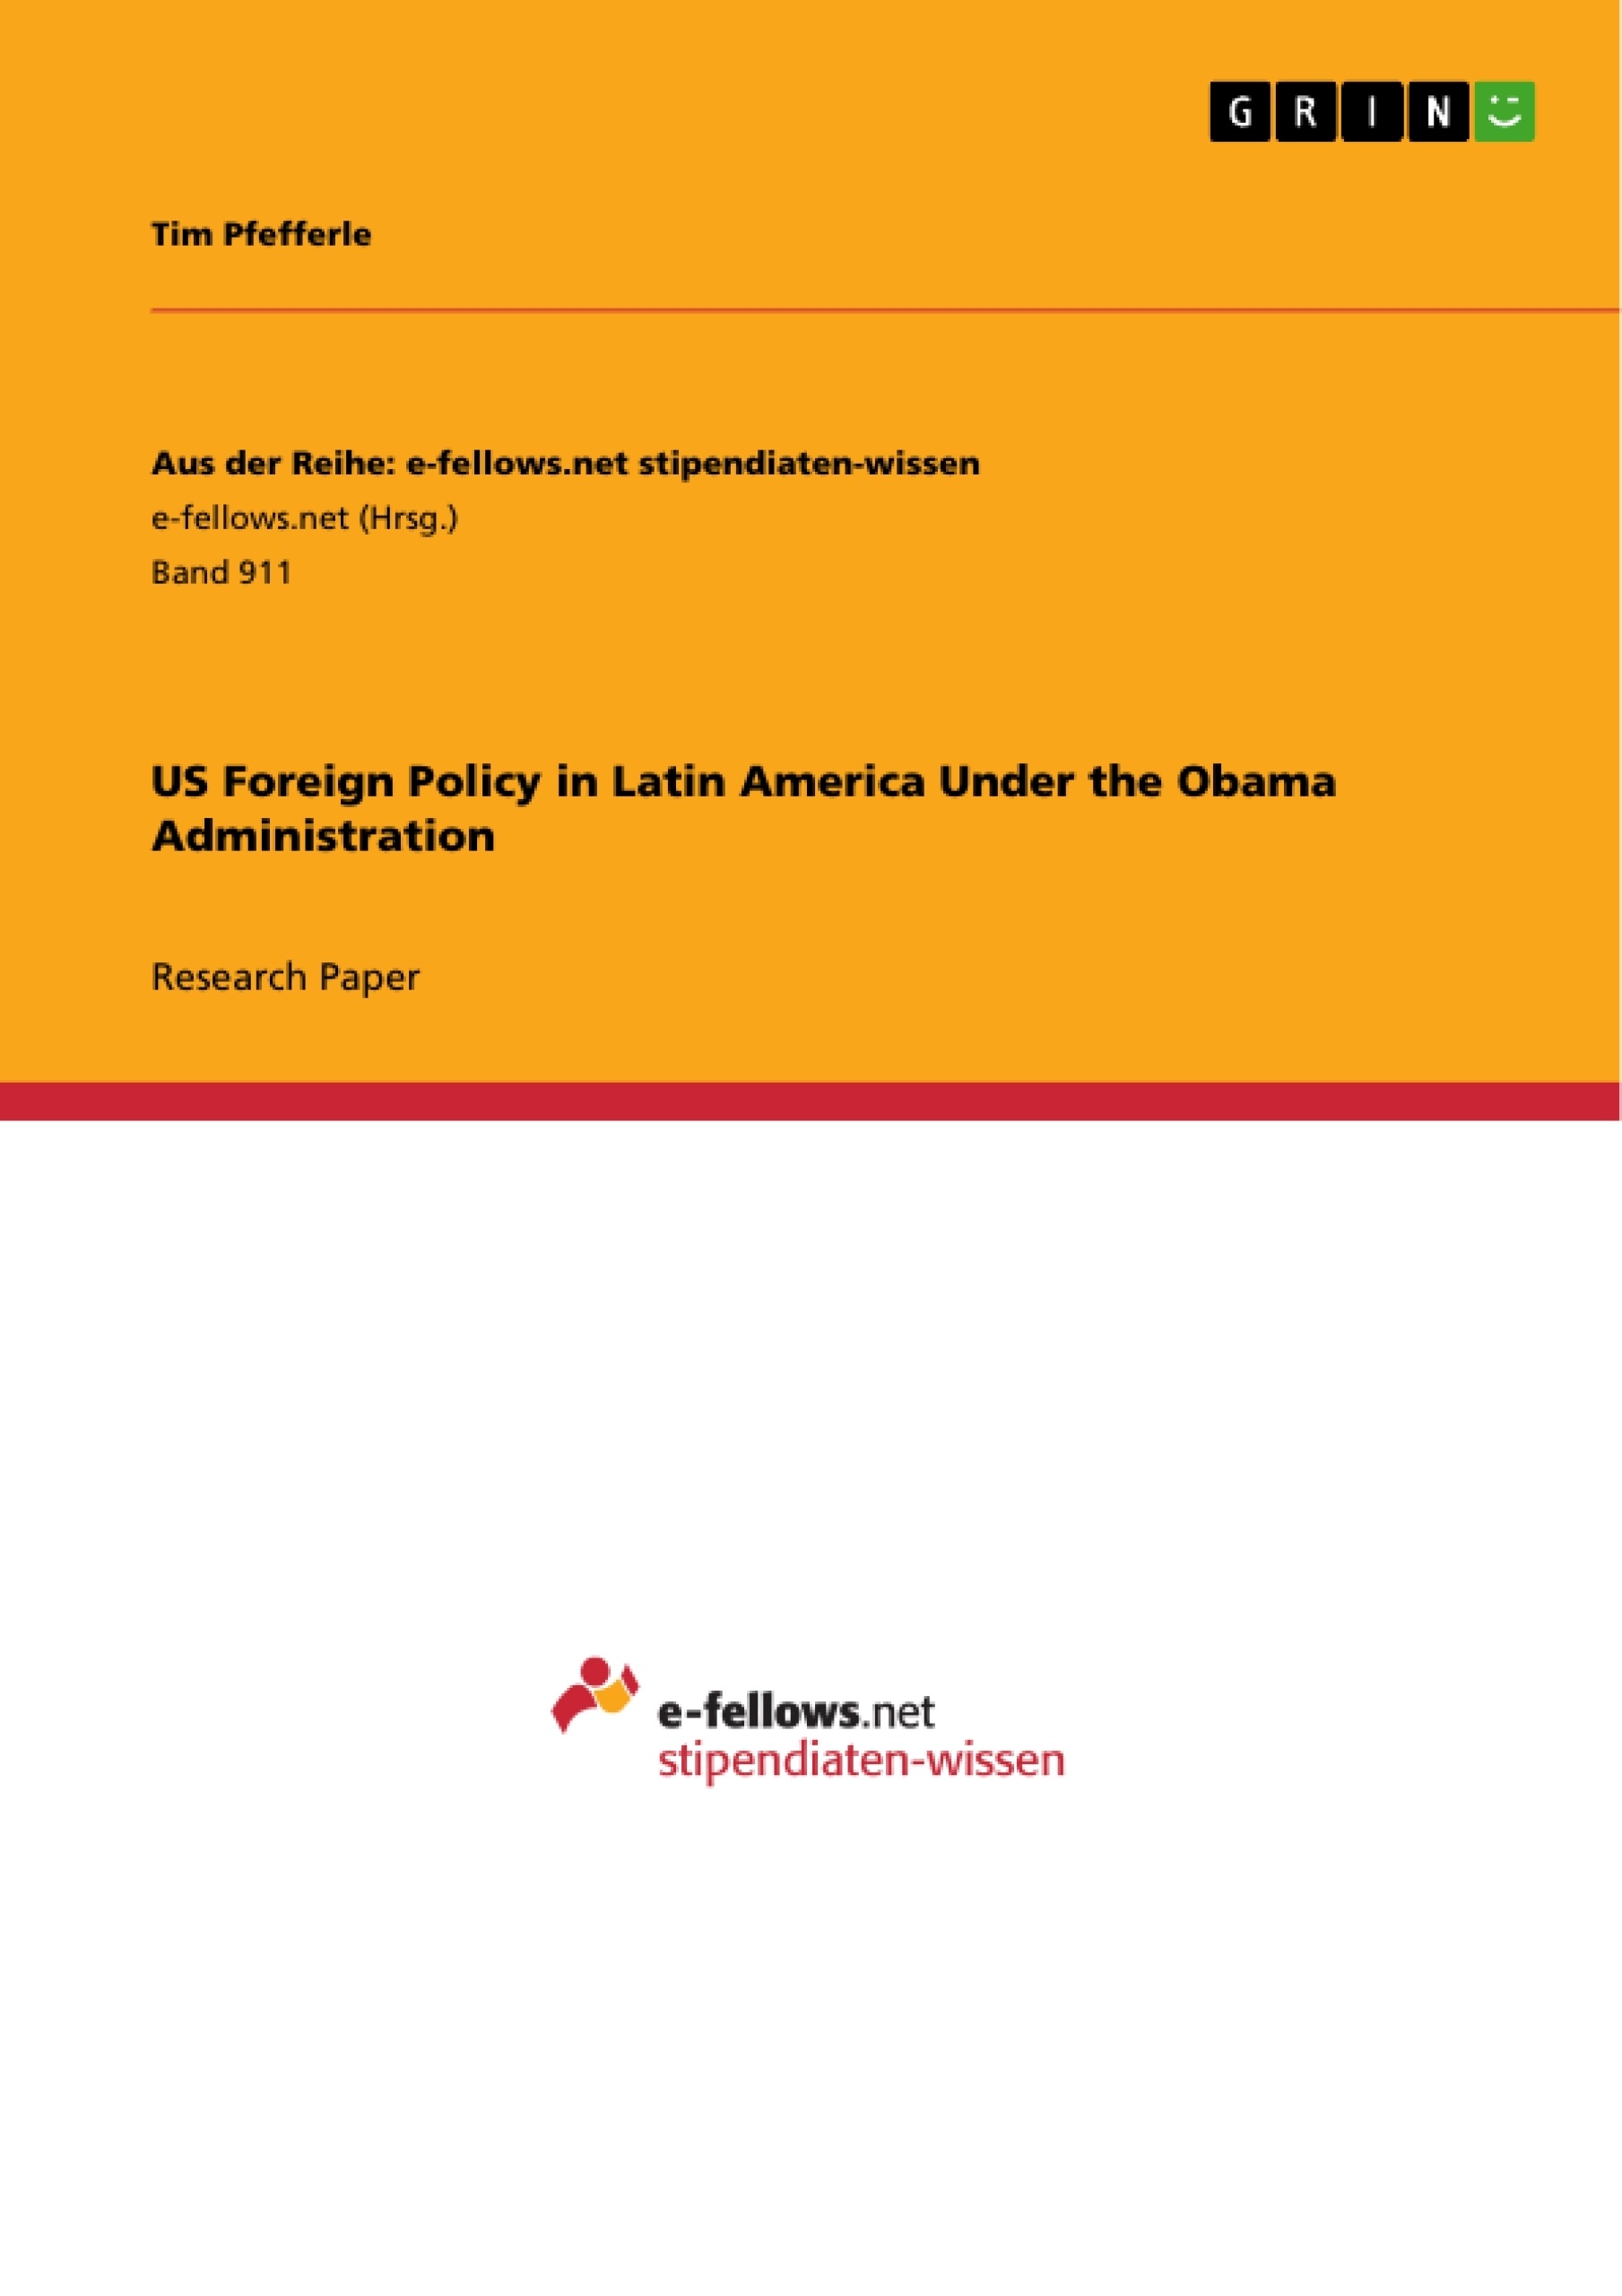 Title: US Foreign Policy in Latin America Under the Obama Administration